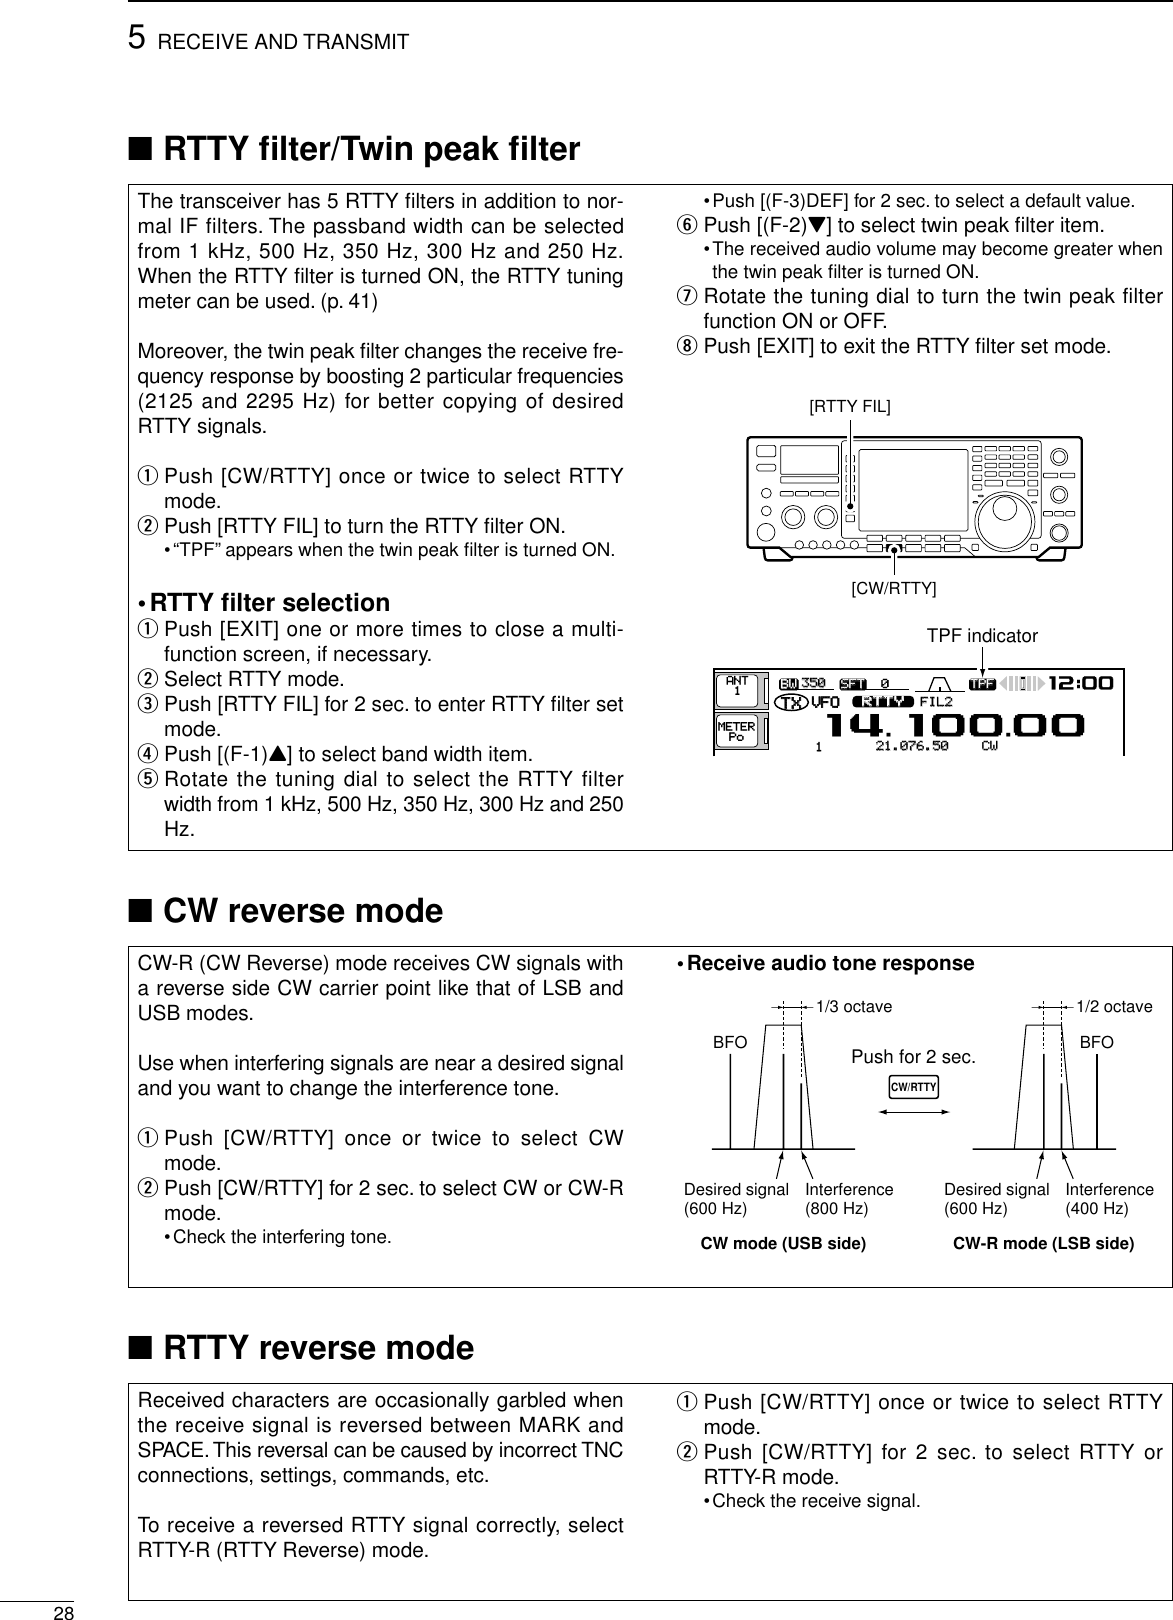 The transceiver has 5 RTTY ﬁlters in addition to nor-mal IF filters. The passband width can be selectedfrom 1 kHz, 500 Hz, 350 Hz, 300 Hz and 250 Hz.When the RTTY ﬁlter is turned ON, the RTTY tuningmeter can be used. (p. 41)Moreover, the twin peak ﬁlter changes the receive fre-quency response by boosting 2 particular frequencies(2125 and 2295 Hz) for better copying of desiredRTTY signals.qPush [CW/RTTY] once or twice to select RTTYmode.wPush [RTTY FIL] to turn the RTTY ﬁlter ON.•“TPF”appears when the twin peak ﬁlter is turned ON.•RTTY ﬁlter selectionqPush [EXIT] one or more times to close a multi-function screen, if necessary.wSelect RTTY mode.ePush [RTTY FIL] for 2 sec. to enter RTTY ﬁlter setmode.rPush [(F-1)Y] to select band width item.tRotate the tuning dial to select the RTTY filterwidth from 1 kHz, 500 Hz, 350 Hz, 300 Hz and 250Hz.•Push [(F-3)DEF] for 2 sec. to select a default value.yPush [(F-2)Z] to select twin peak ﬁlter item.•The received audio volume may become greater whenthe twin peak ﬁlter is turned ON.uRotate the tuning dial to turn the twin peak filterfunction ON or OFF.iPush [EXIT] to exit the RTTY ﬁlter set mode.ANT1METERPoBWBW 350350 SFTSFT 0VFOVFO FIL2FIL2RTTYRTTYqw:ppTXTX1CWCWqr≥qpp≥pp21.076.5021.076.50TPFTPF[RTTY FIL][CW/RTTY]TPF indicator285RECEIVE AND TRANSMIT■RTTY reverse modeReceived characters are occasionally garbled whenthe receive signal is reversed between MARK andSPACE.This reversal can be caused by incorrect TNCconnections, settings, commands, etc.To receive a reversed RTTY signal correctly, selectRTTY-R (RTTY Reverse) mode.qPush [CW/RTTY] once or twice to select RTTYmode.wPush [CW/RTTY] for 2 sec. to select RTTY orRTTY-R mode.•Check the receive signal.■RTTY ﬁlter/Twin peak ﬁlter■CW reverse modeCW-R (CW Reverse) mode receives CW signals witha reverse side CW carrier point like that of LSB andUSB modes.Use when interfering signals are near a desired signaland you want to change the interference tone.qPush [CW/RTTY] once or twice to select CWmode.wPush [CW/RTTY] for 2 sec. to select CW or CW-Rmode.•Check the interfering tone.•Receive audio tone responseBFO1/3 octavePush for 2 sec.Desired signal(600 Hz)CW mode (USB side)Interference(800 Hz)BFO1/2 octaveDesired signal(600 Hz)CW-R mode (LSB side)Interference(400 Hz)CW/RTTY